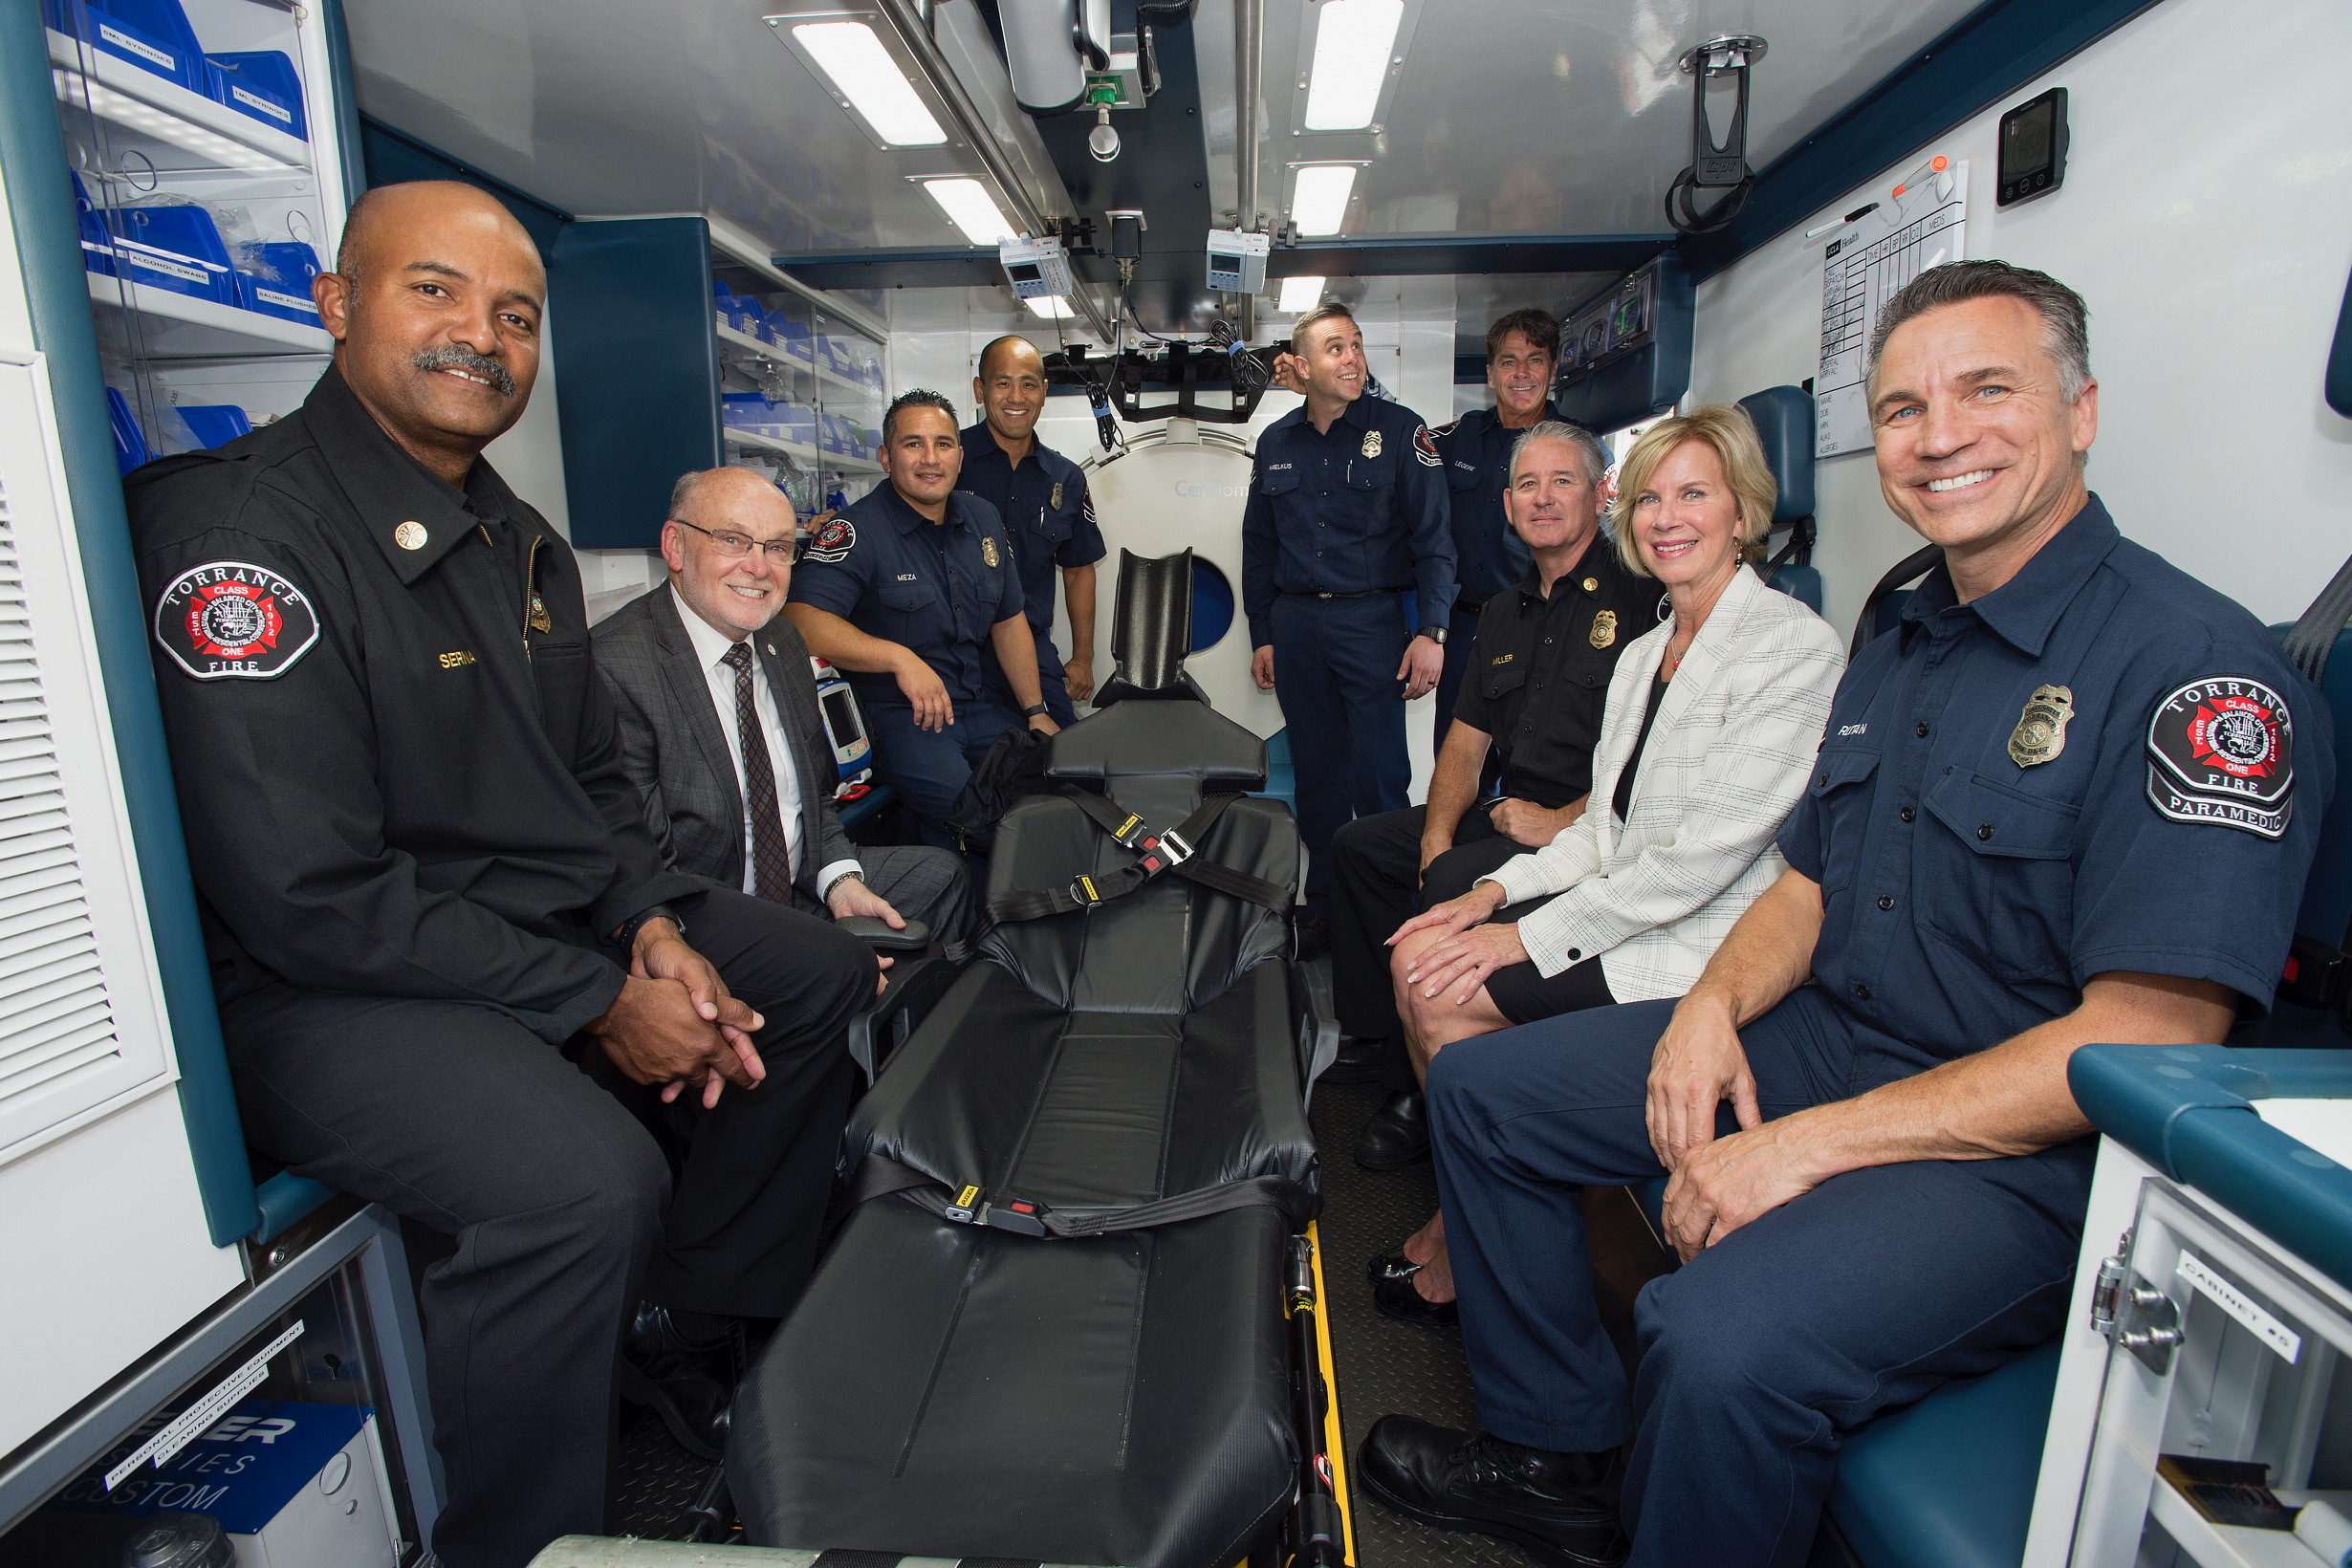 West Coast’s First Mobile Stroke Unit Now in South Bay